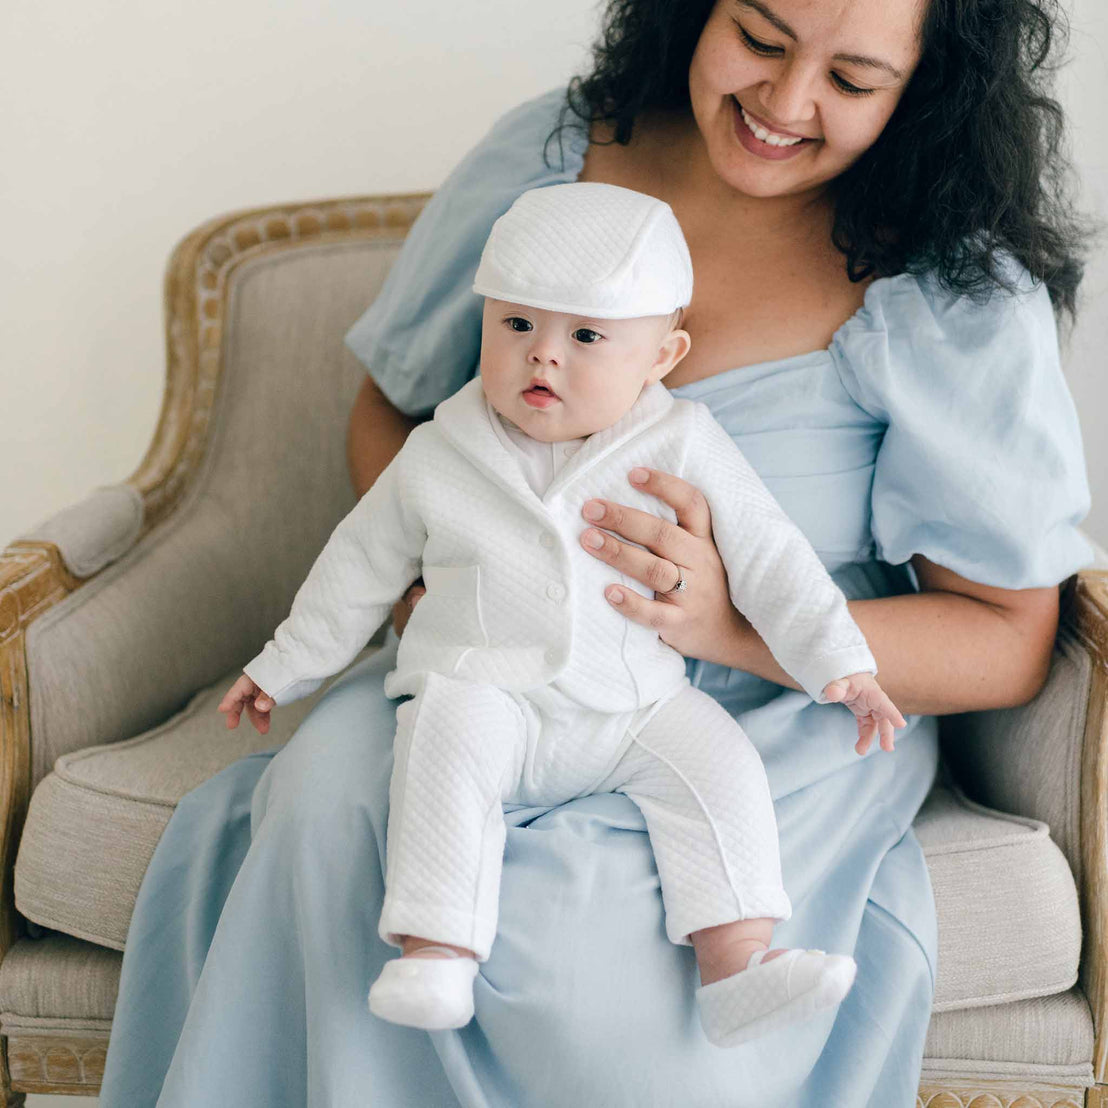 Baby boy sitting with his mother and wearing the Elijah 3-Piece Suit made from 100% white textured cotton jacket and pants, and a white cotton / rayon blend shirt.